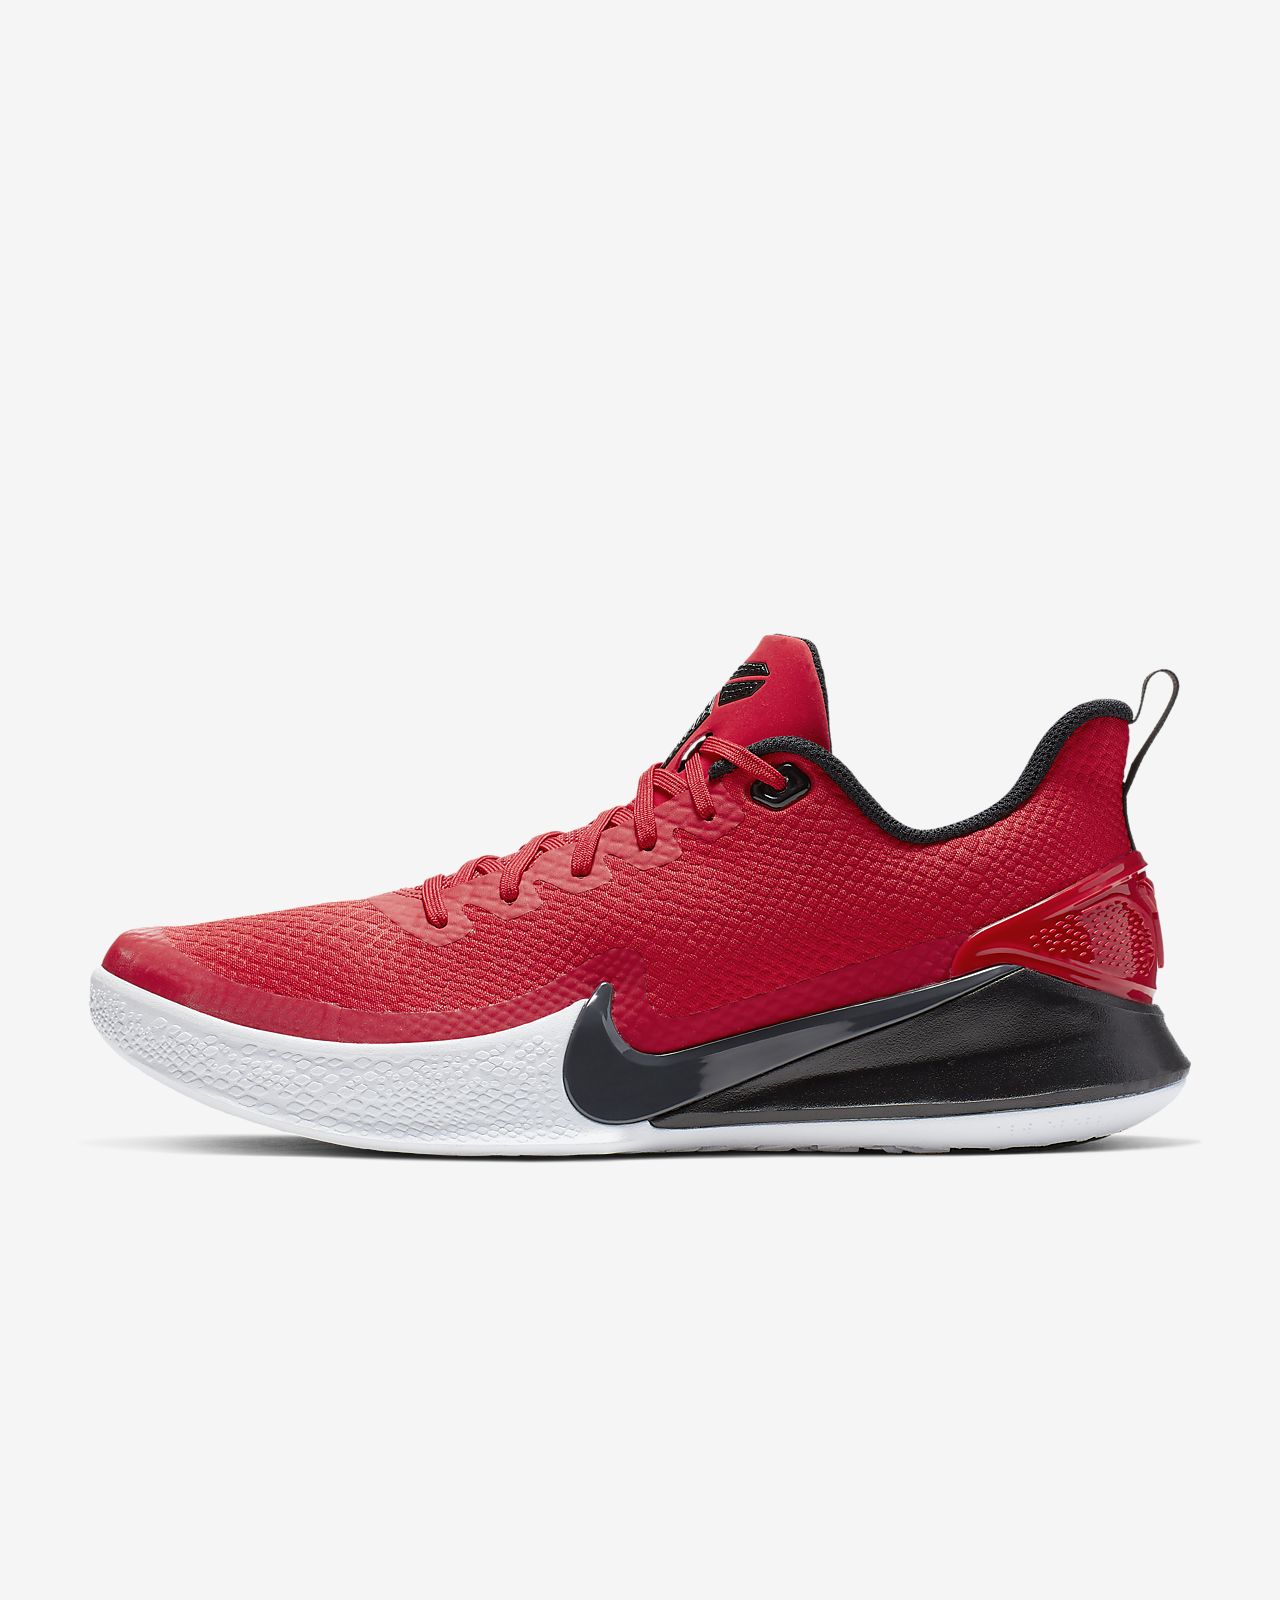 Nike Shoes Store, SAVE 47% - bvlt-abtl.be